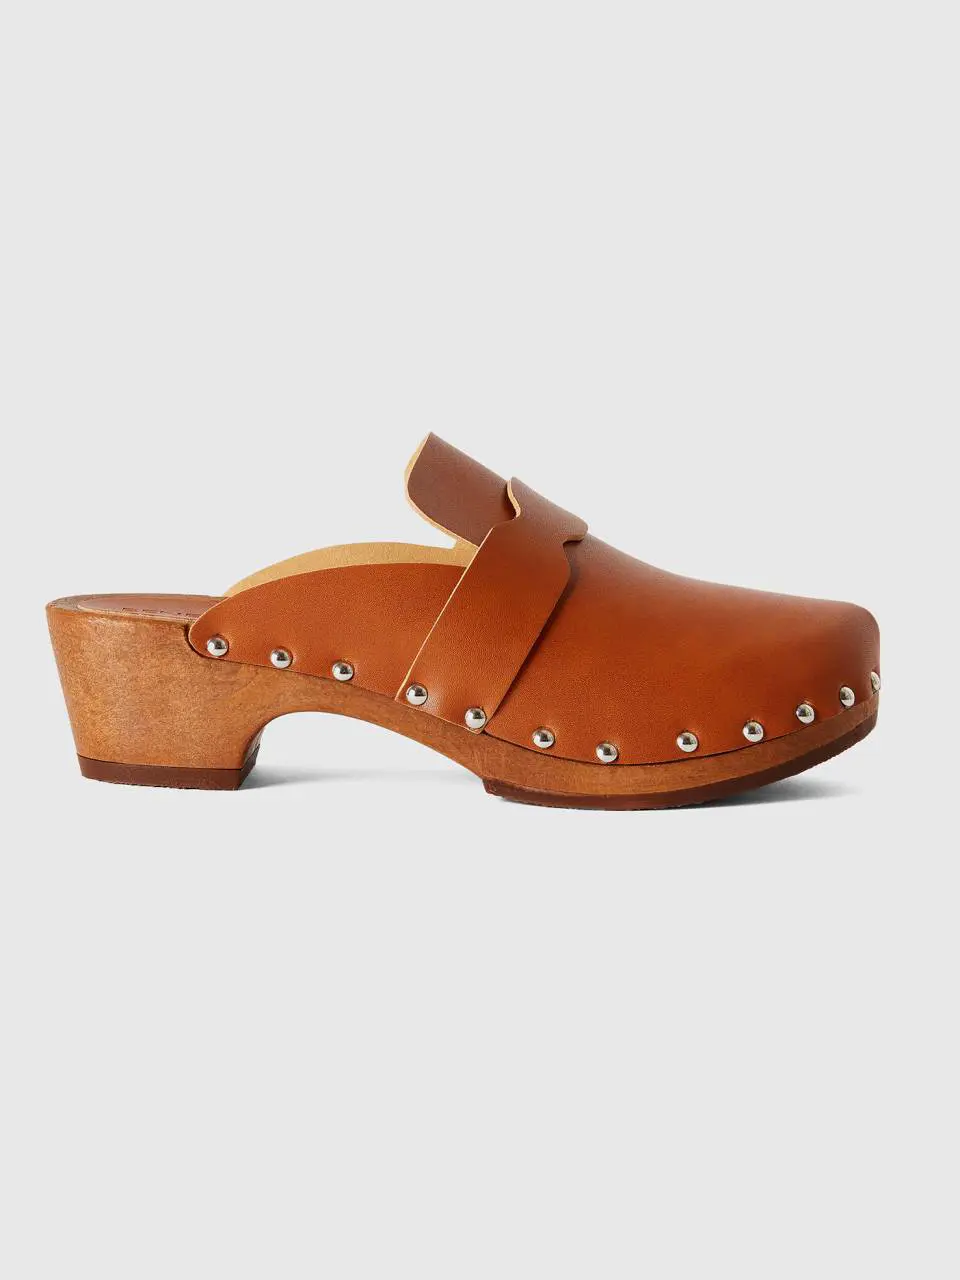 Benetton clogs with studs. 1